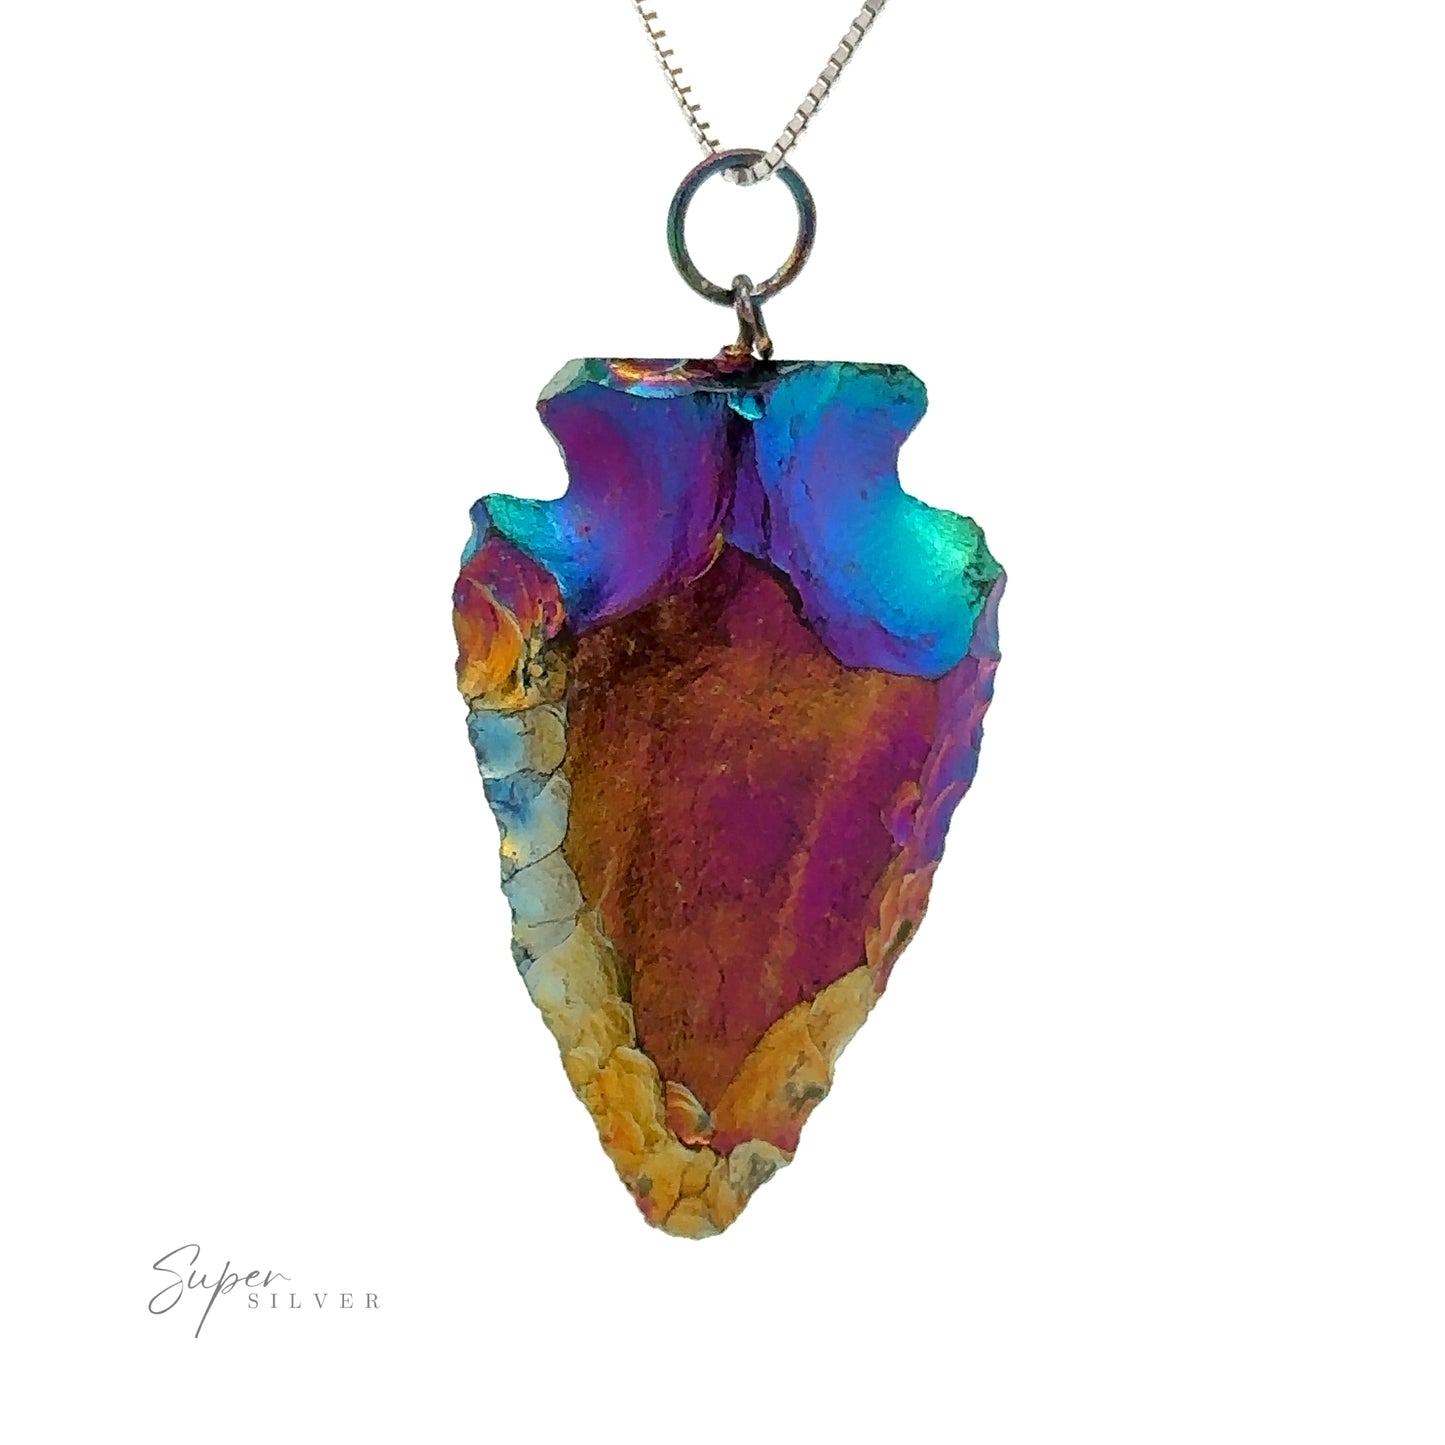 
                  
                    A colorful, iridescent Rainbow Hematite Arrowhead Pendant with a small metal loop and chain is featured on a white background. The mixed metals in the pendant display vivid hues of purple, blue, and gold.
                  
                